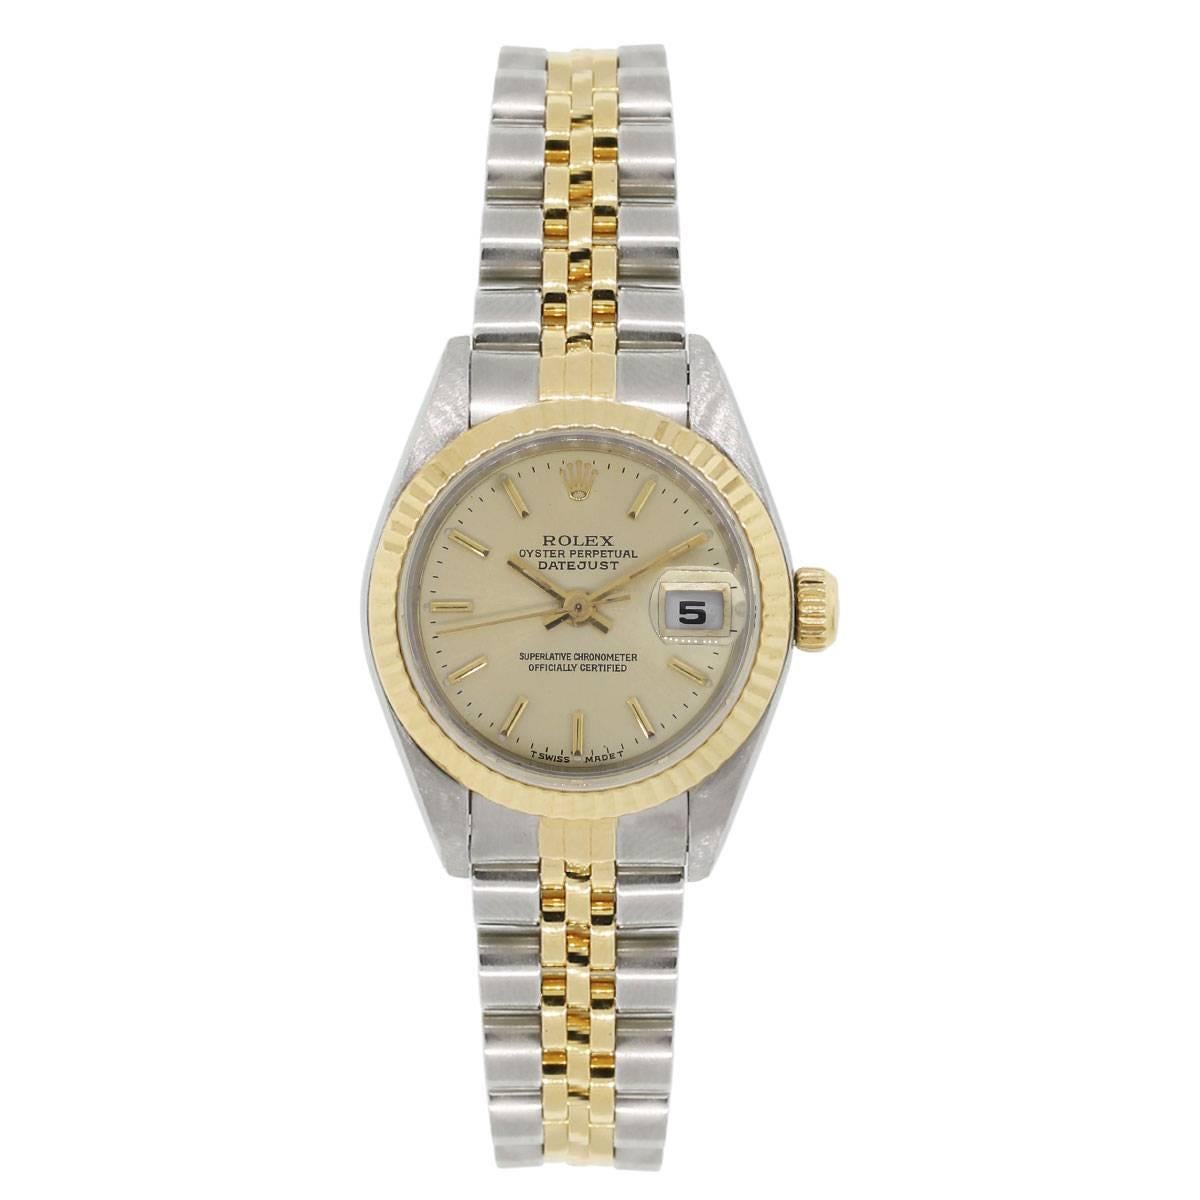 Brand: Rolex
MPN: 69173
Model: Datejust
Case Material: Stainless steel
Case Diameter: 26mm
Crystal: Scratch resistant sapphire
Bezel: 18k yellow gold fluted bezel
Dial: Champagne dial with gold hands and hour markers, date window at the 3 o’clock